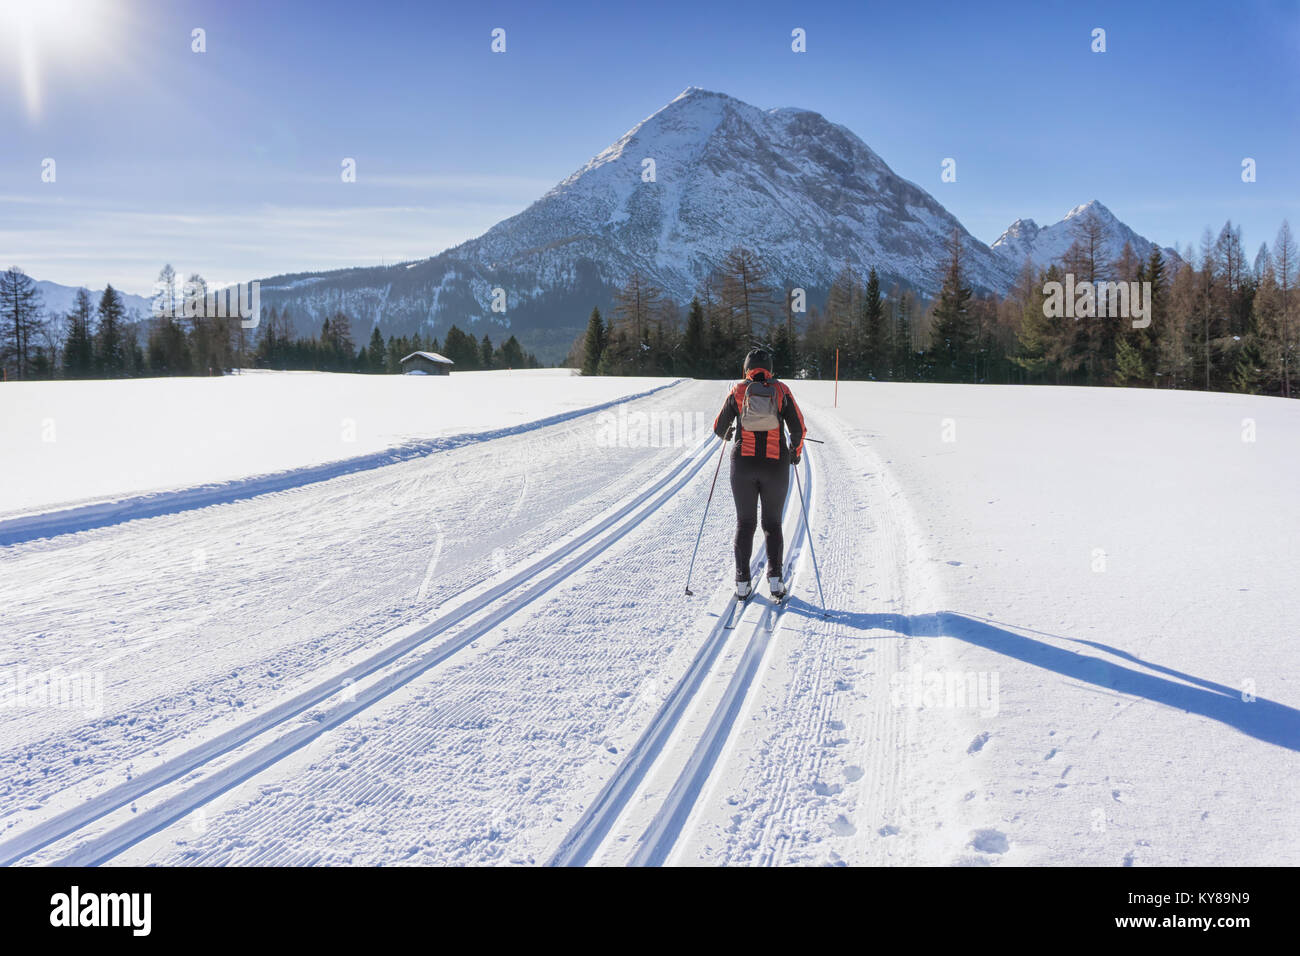 Cross-country Skier in red jacket  runs on groomed ski track in sunny winter day. Winter mountain landscape: Tirol, Alps, Austria. Stock Photo